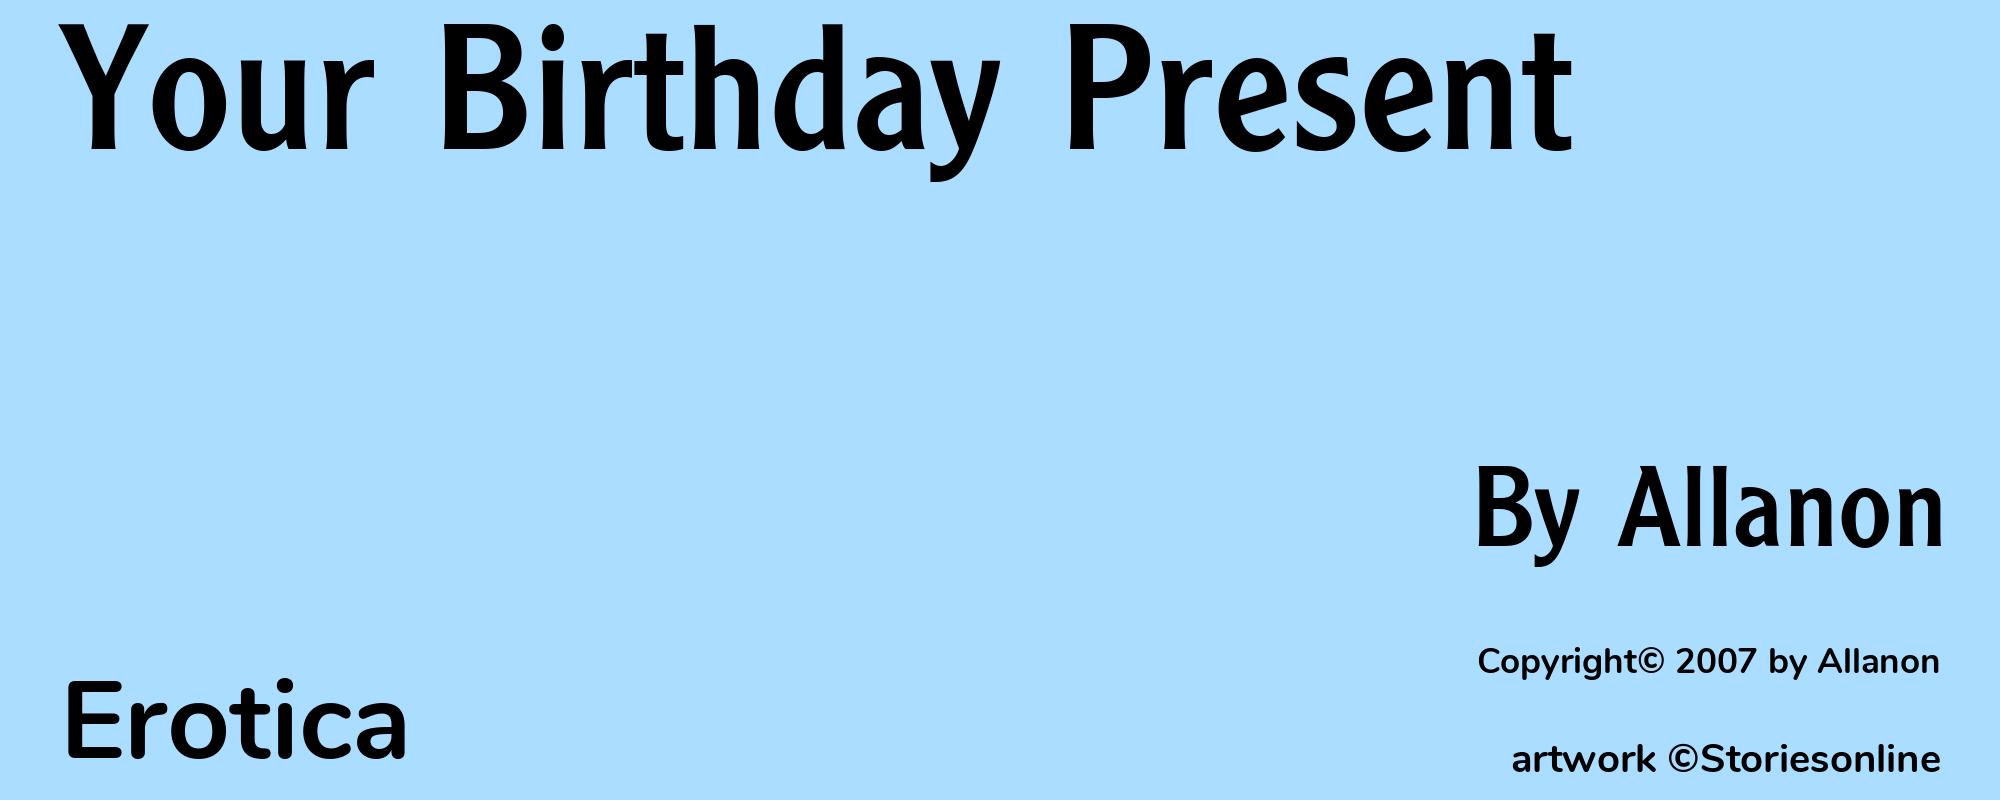 Your Birthday Present - Cover